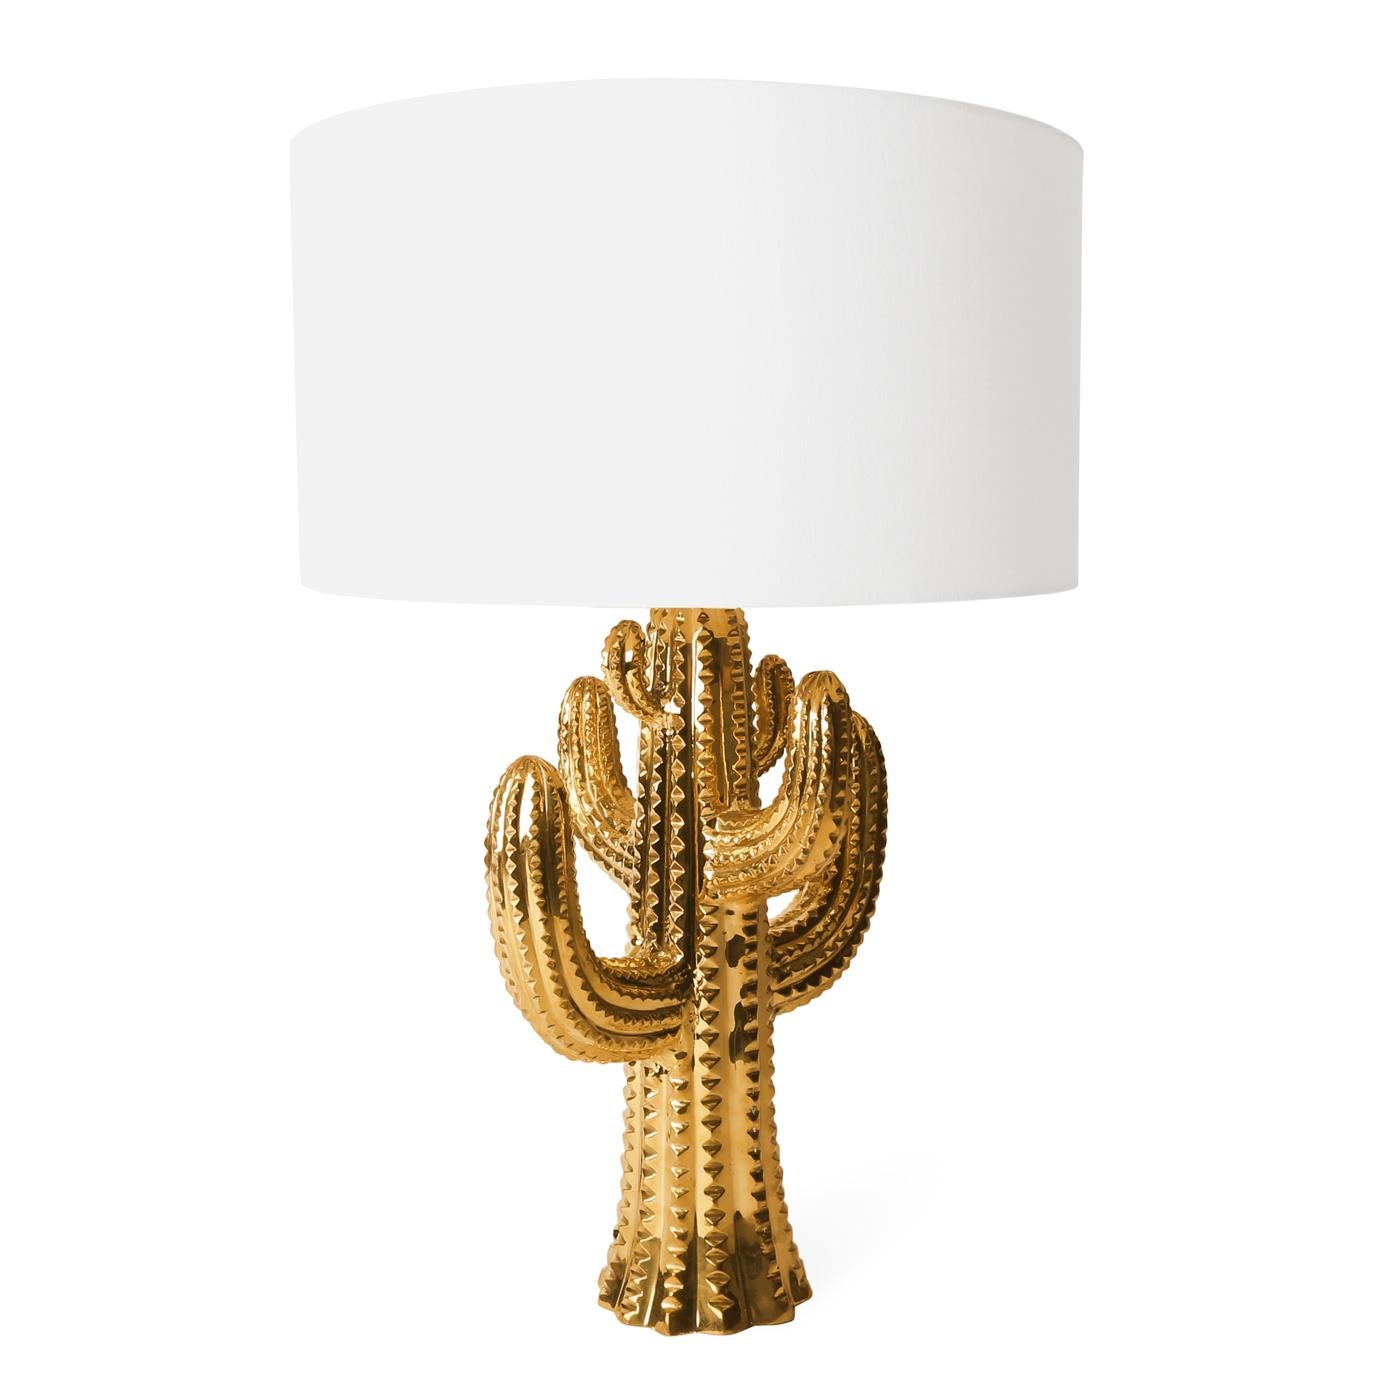 Desert Glow. Hand-cast in solid brass from a clay model sculpted by Jonathan and his team in our Soho studio, our Brass Cactus Lamp is a pared down homage to the majestic Saguaro cactus topped with a silky white shade. Bring a touch of Southwest